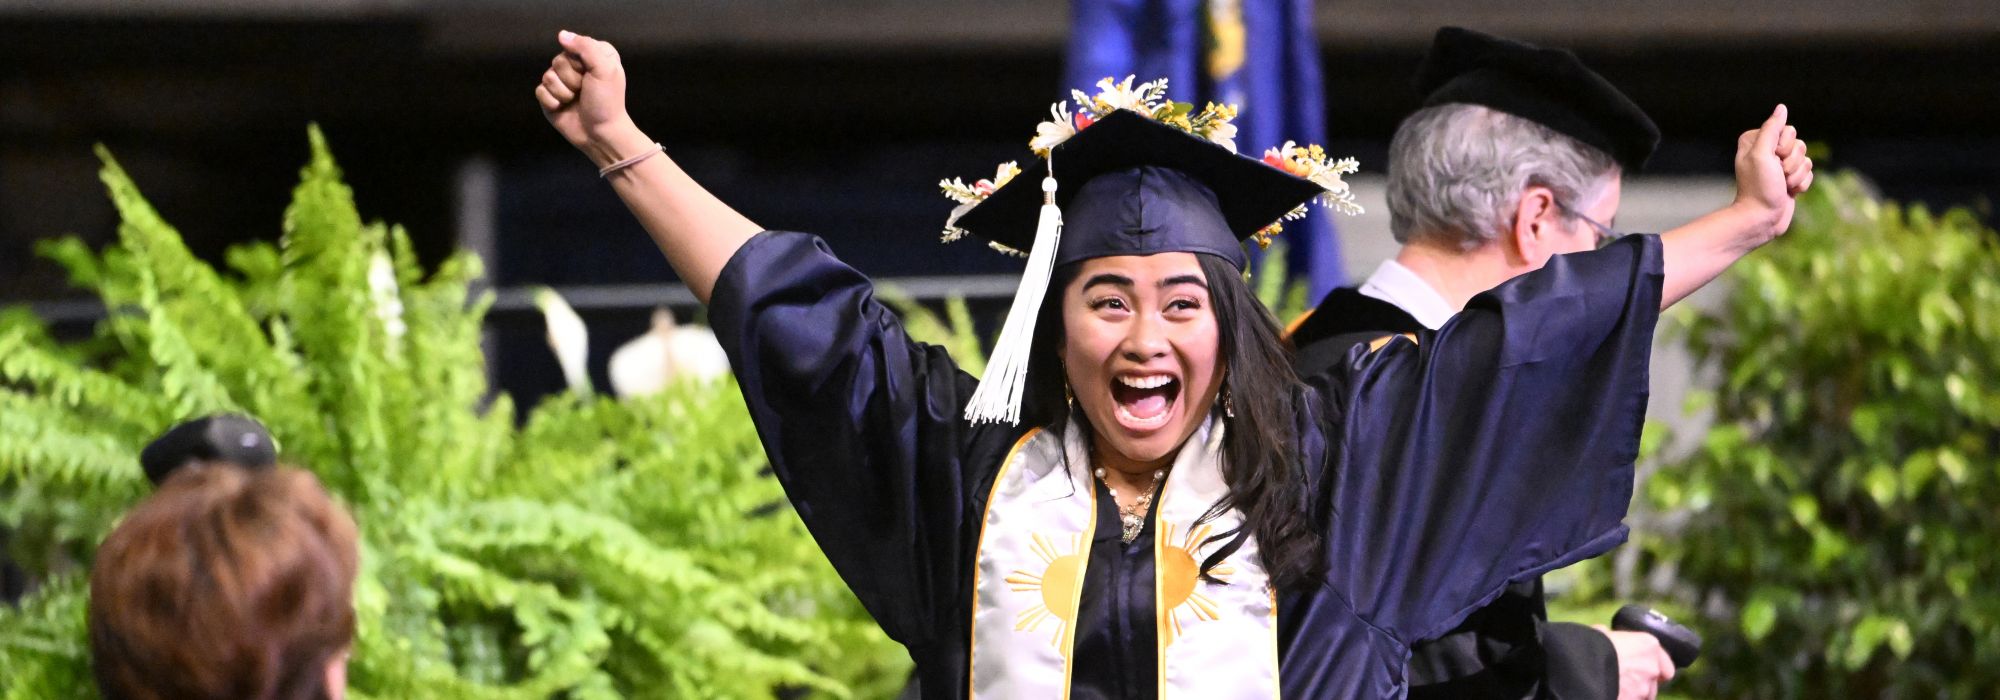 A student celebrates with arms outstretched while walking across the stage at commencment.